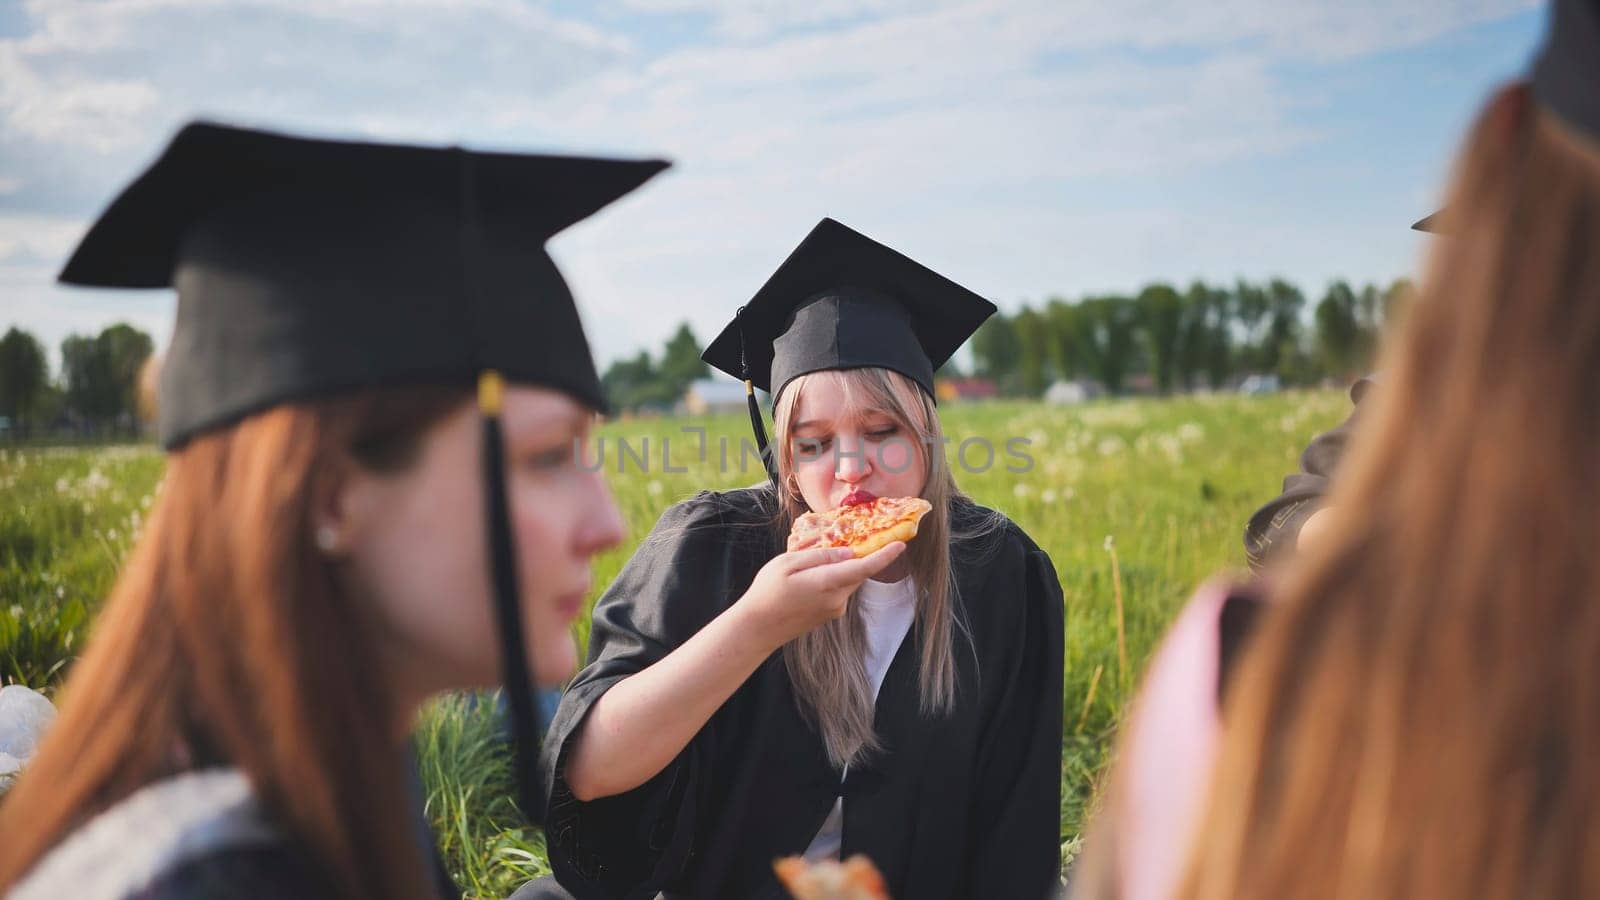 Graduates in black suits eating pizza in a city meadow